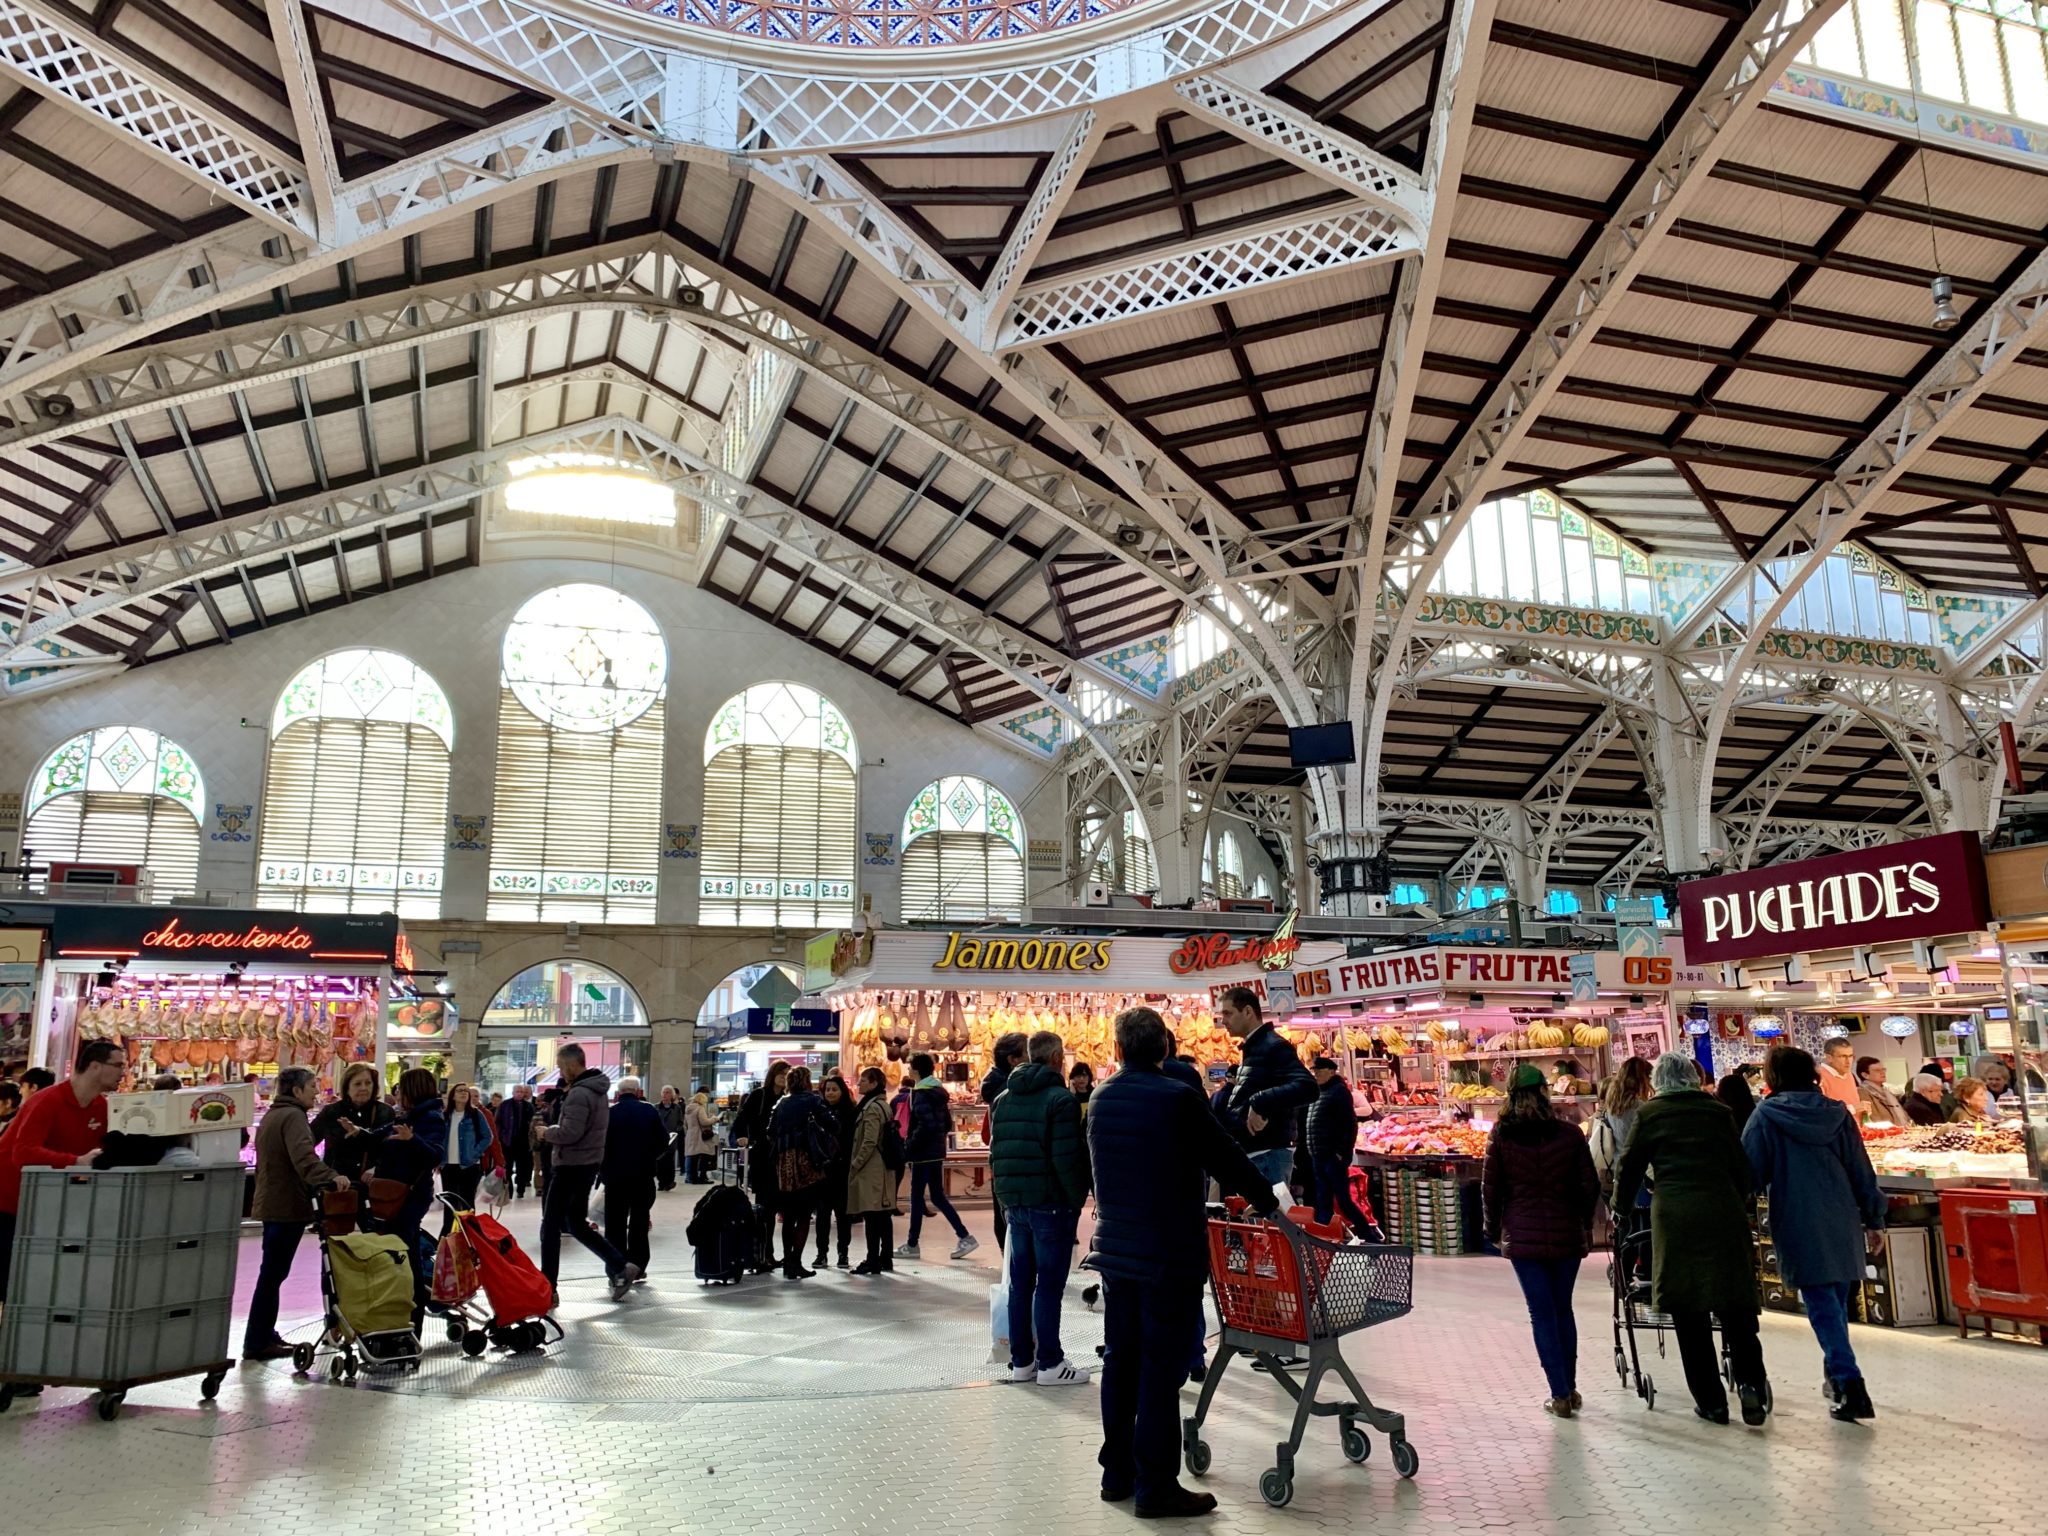 Mercat Central is arguably one of the biggest markets in Europe